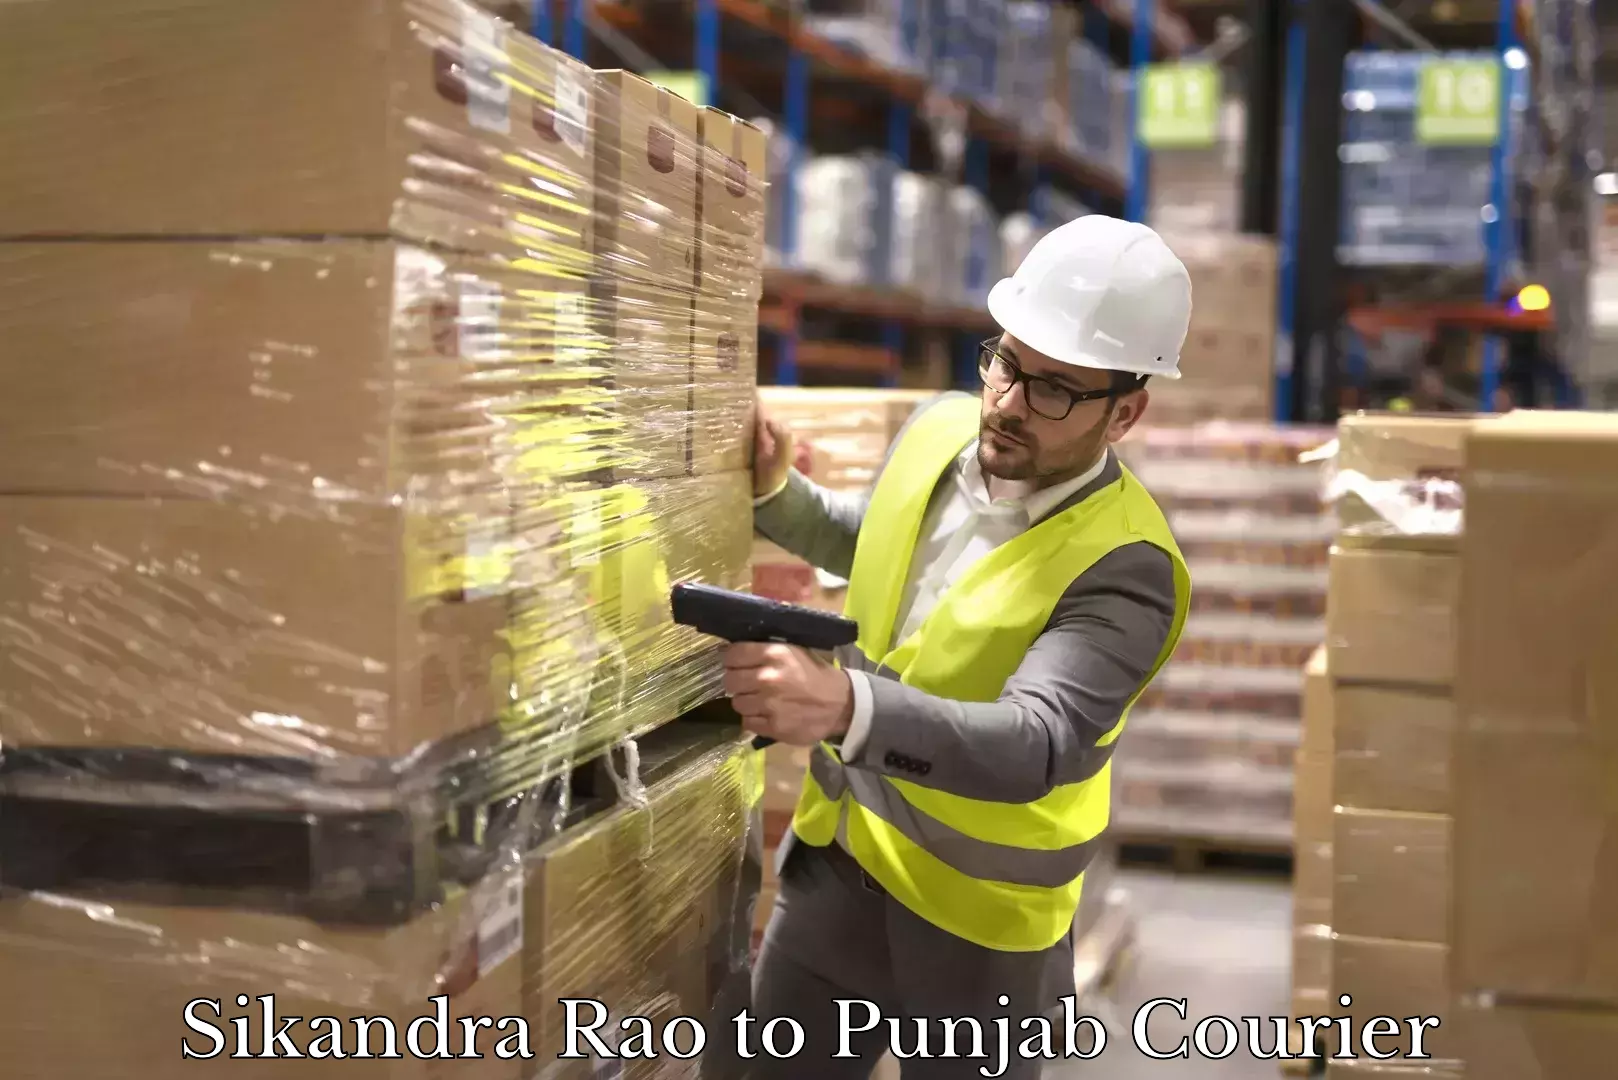 Professional delivery solutions Sikandra Rao to Punjab